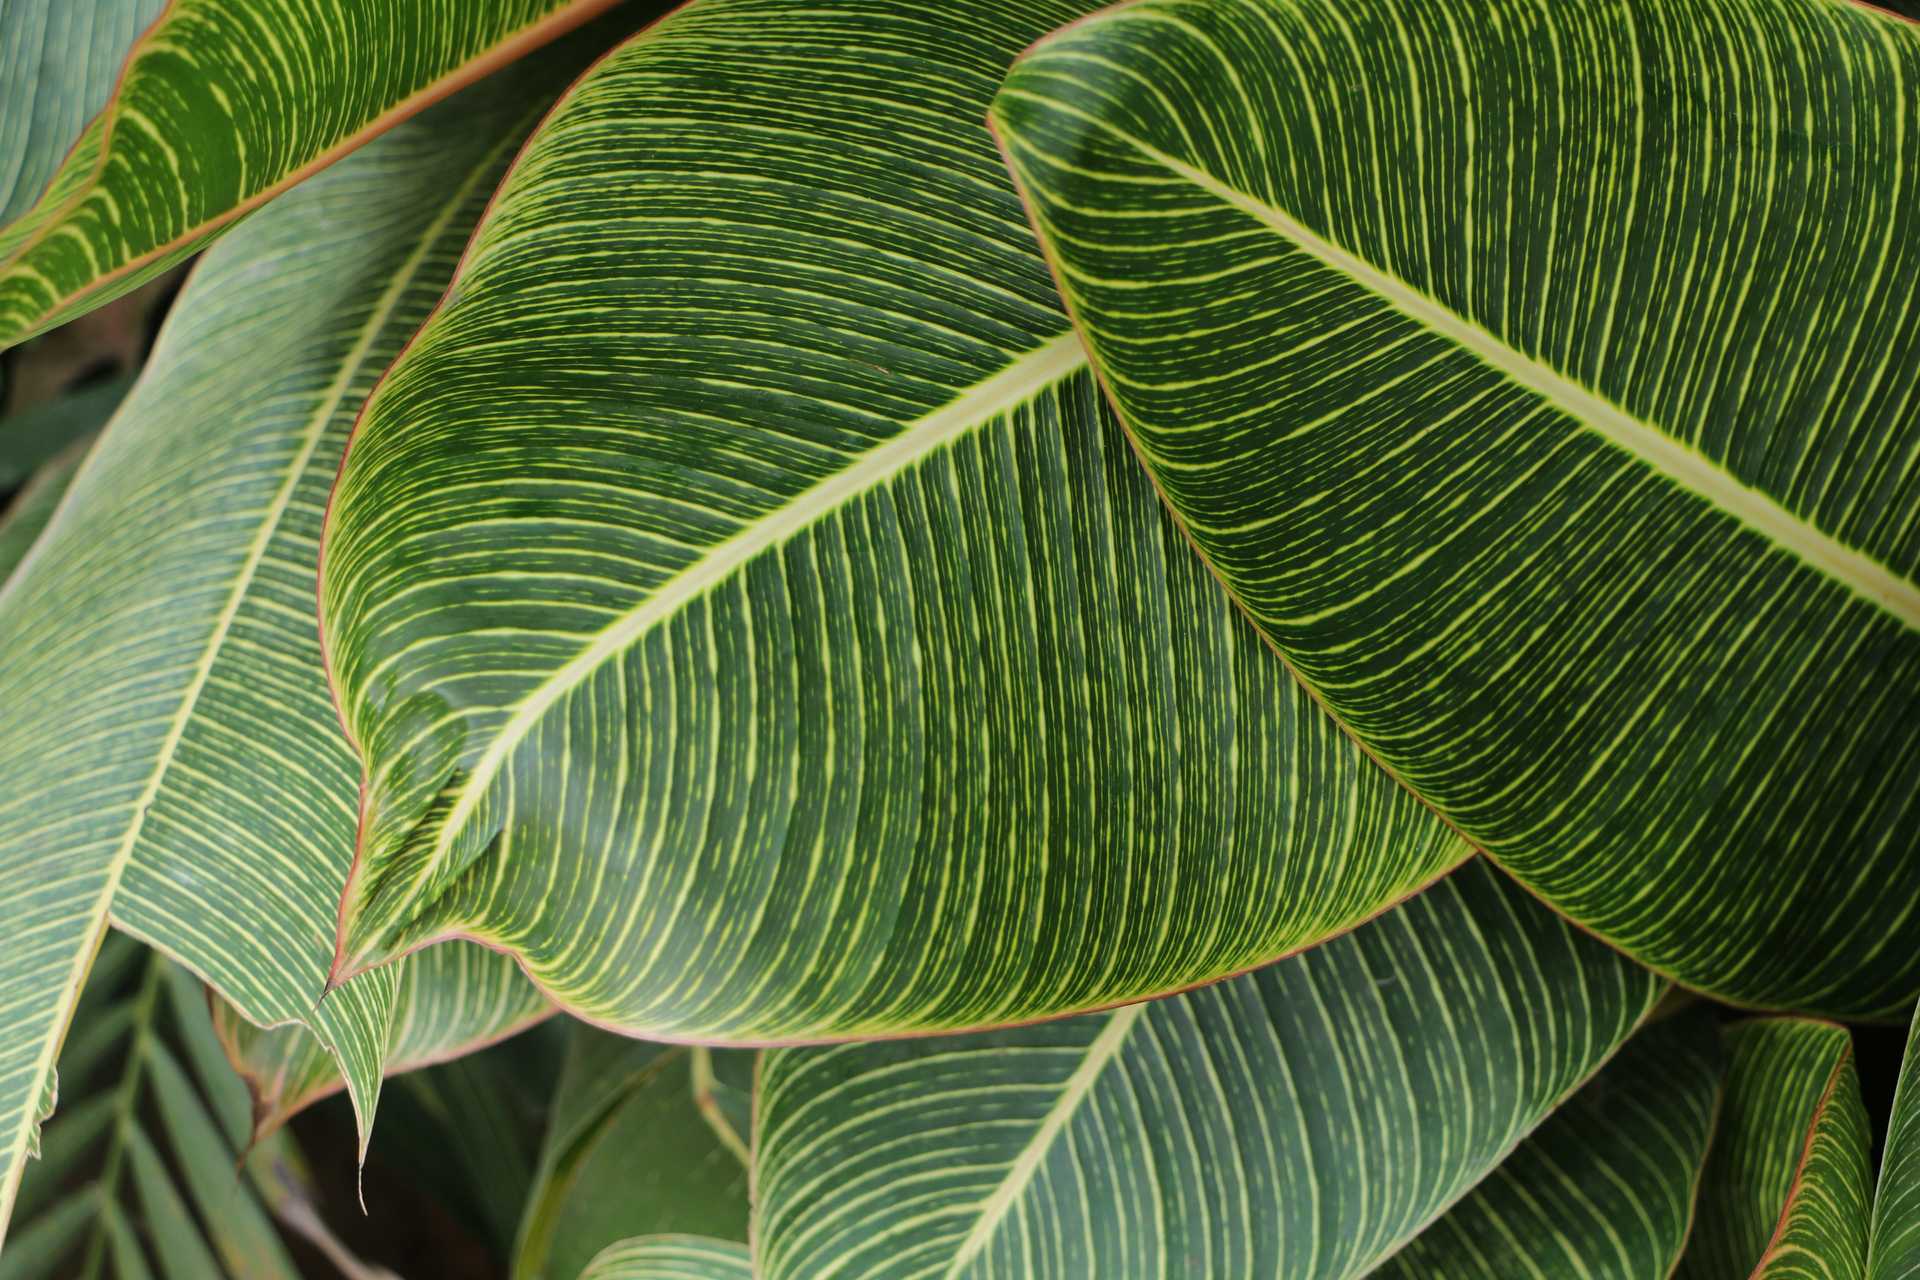 Close-Up Photography of Green Leaves